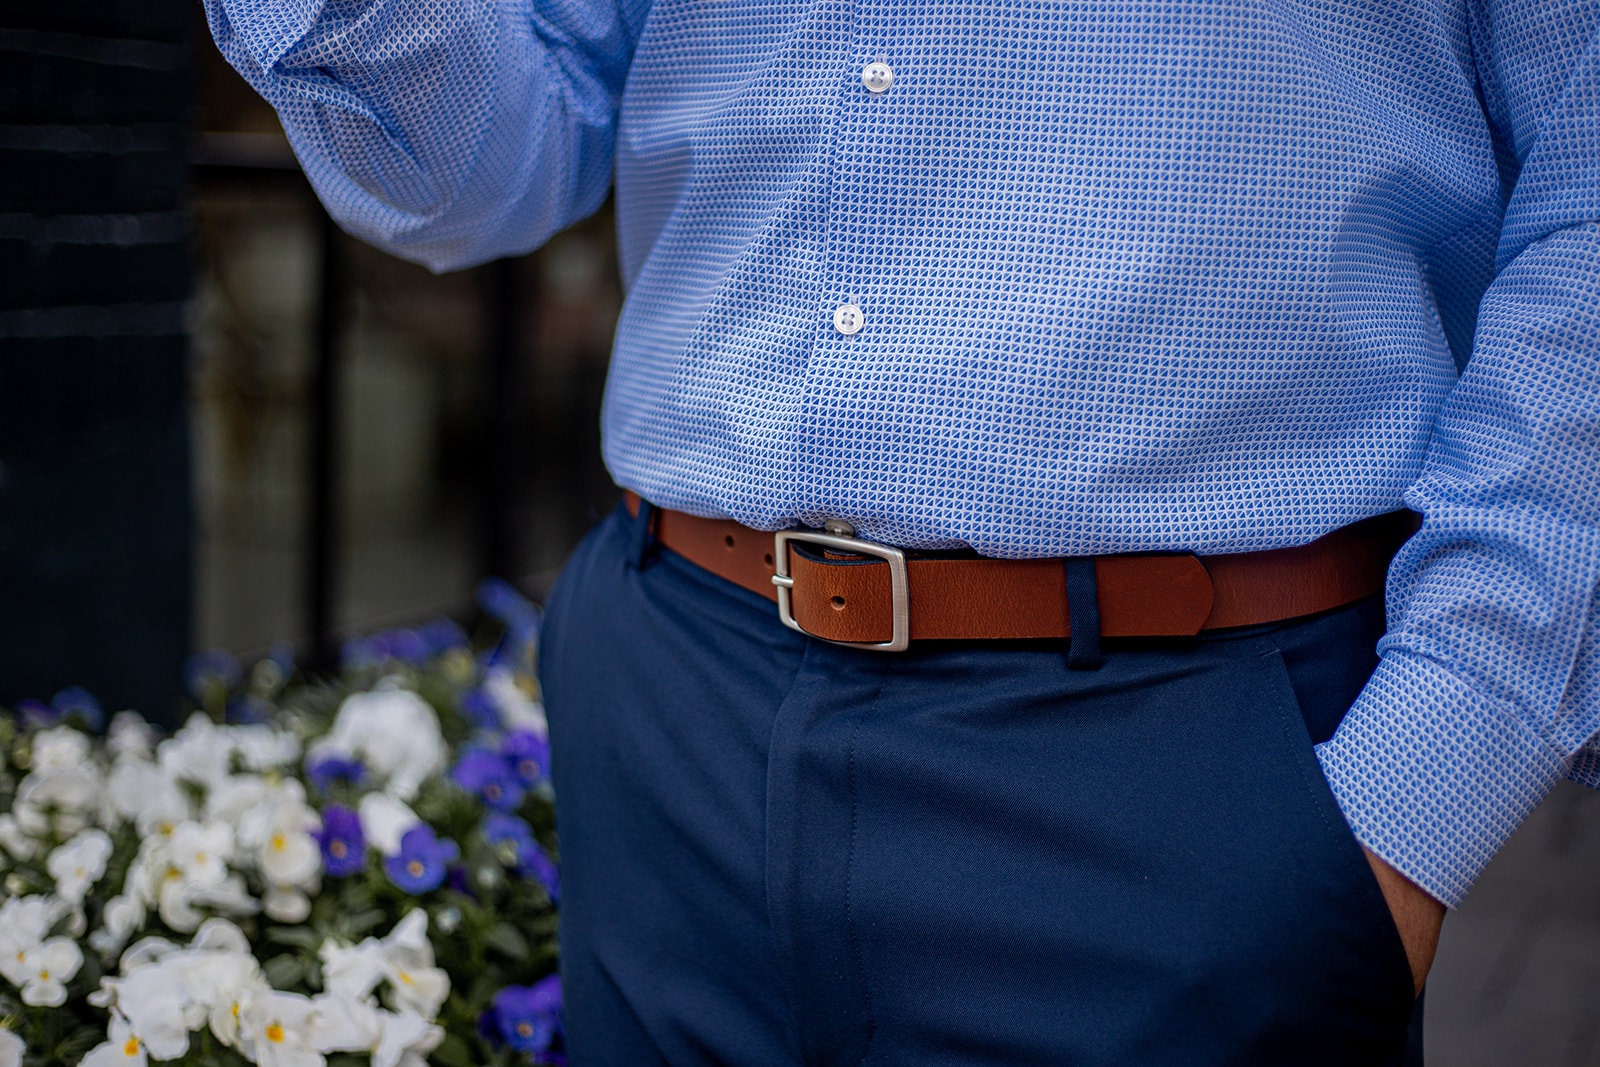 Everyday Casual Work or Professional Belt 1-1/2 Wide Hand-cut